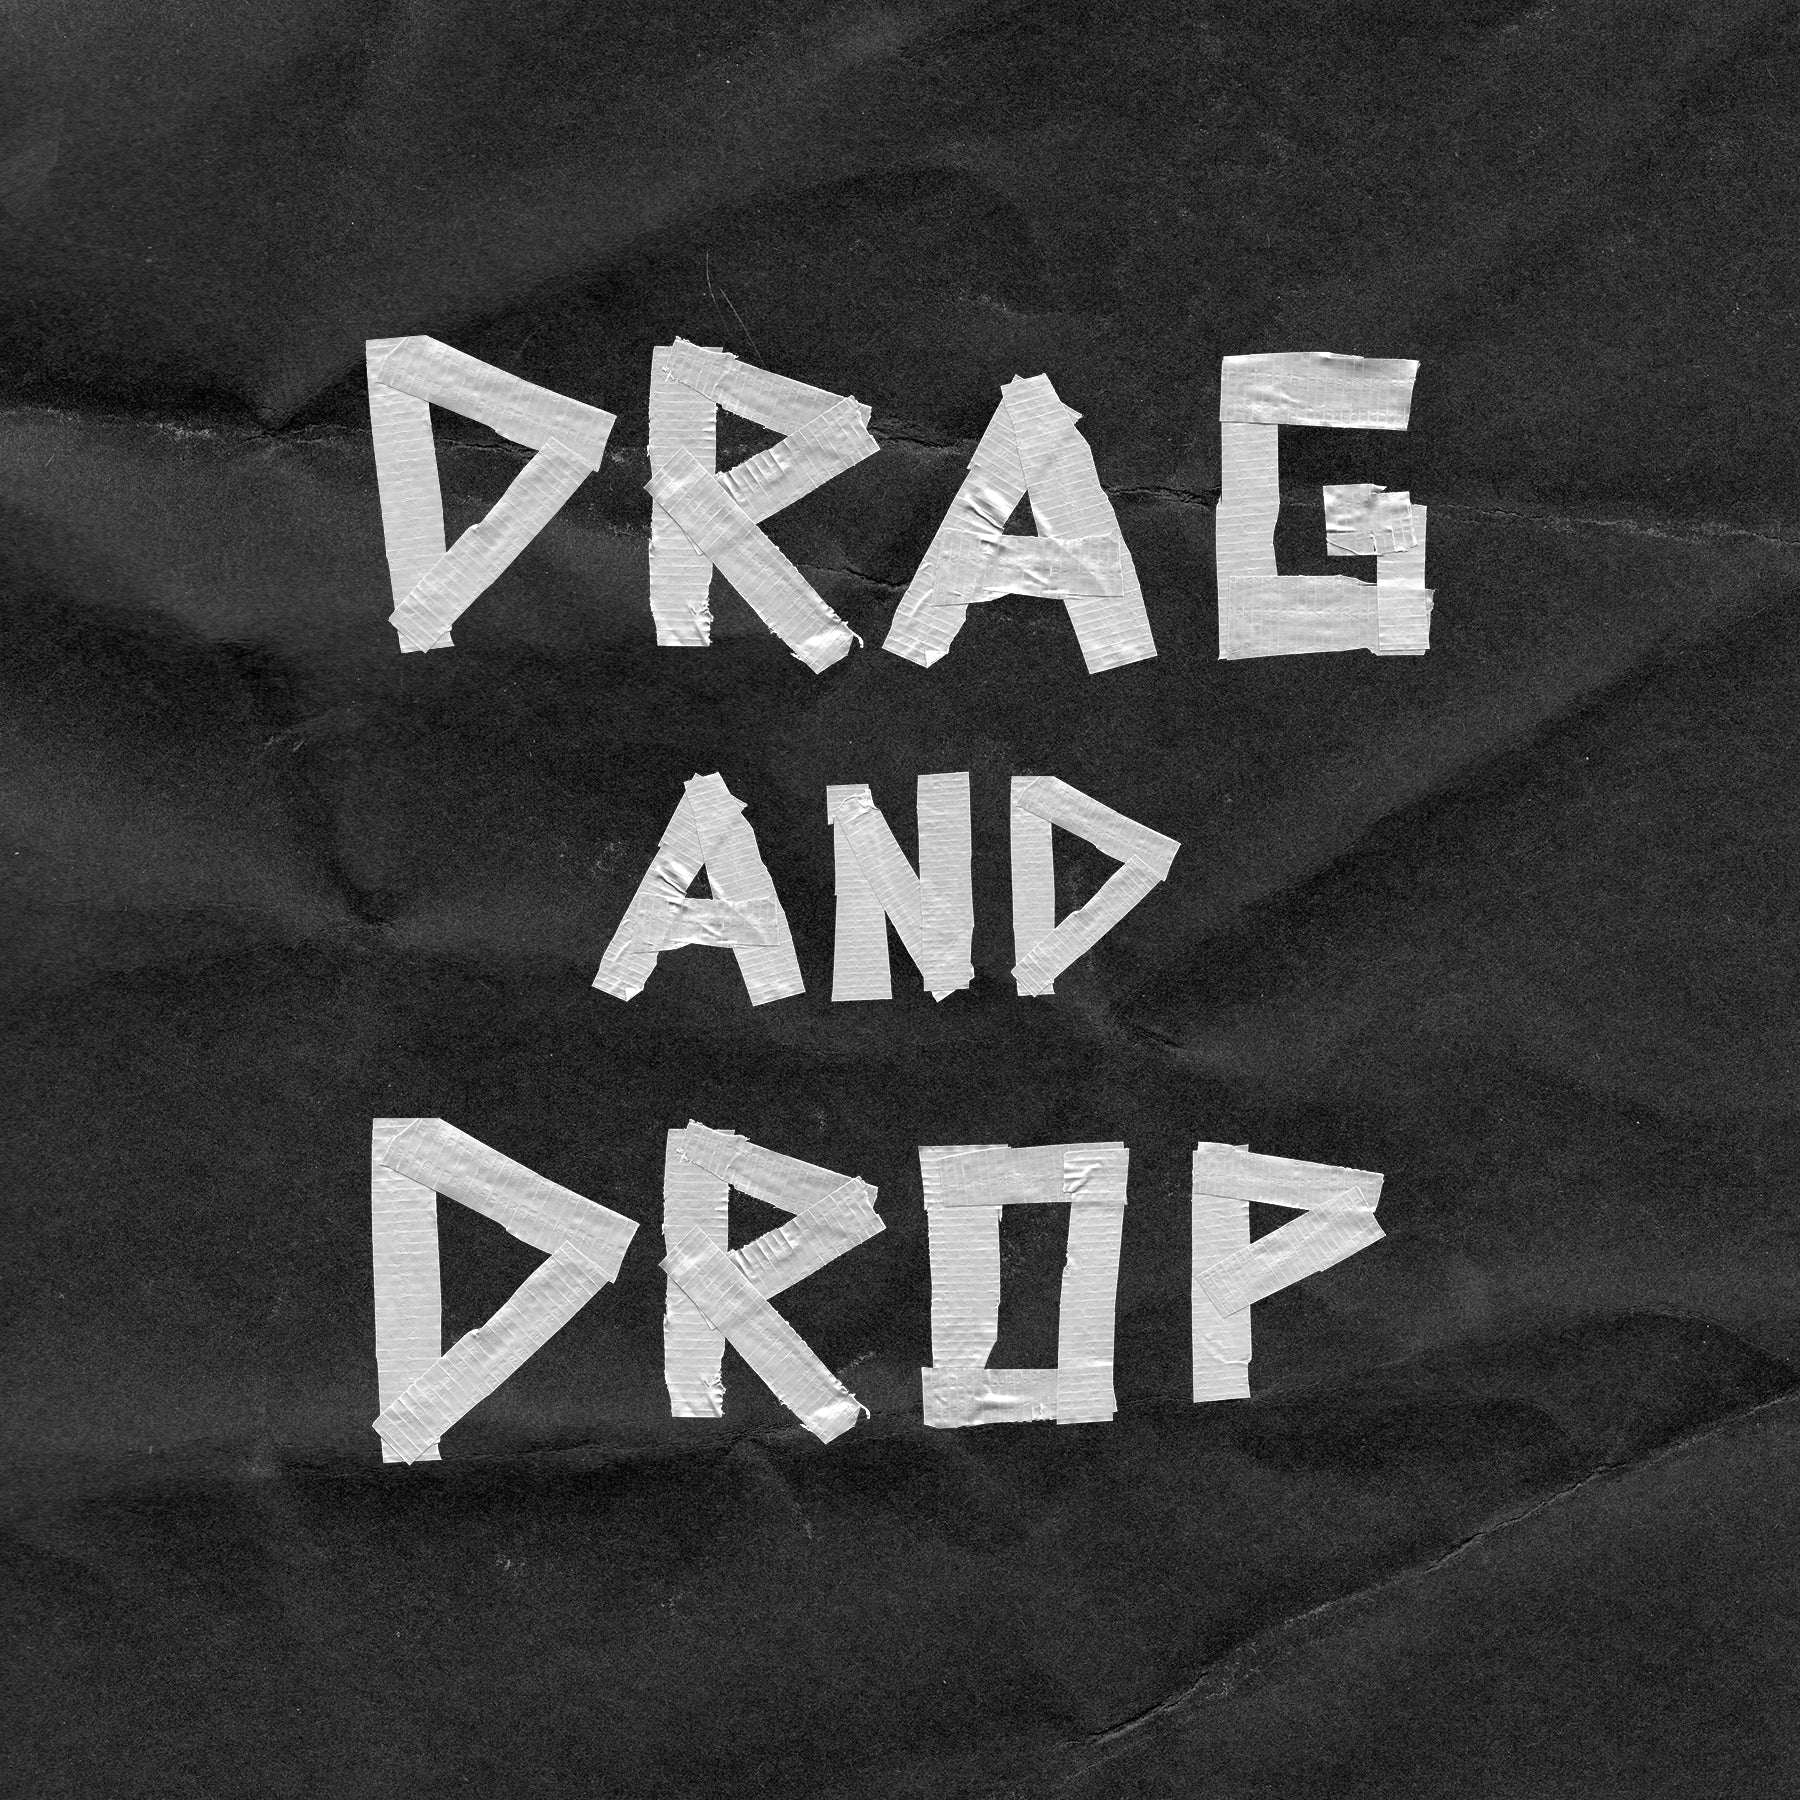 Text made out of duct tape on a textured background that reads "DRAG AND DROP".